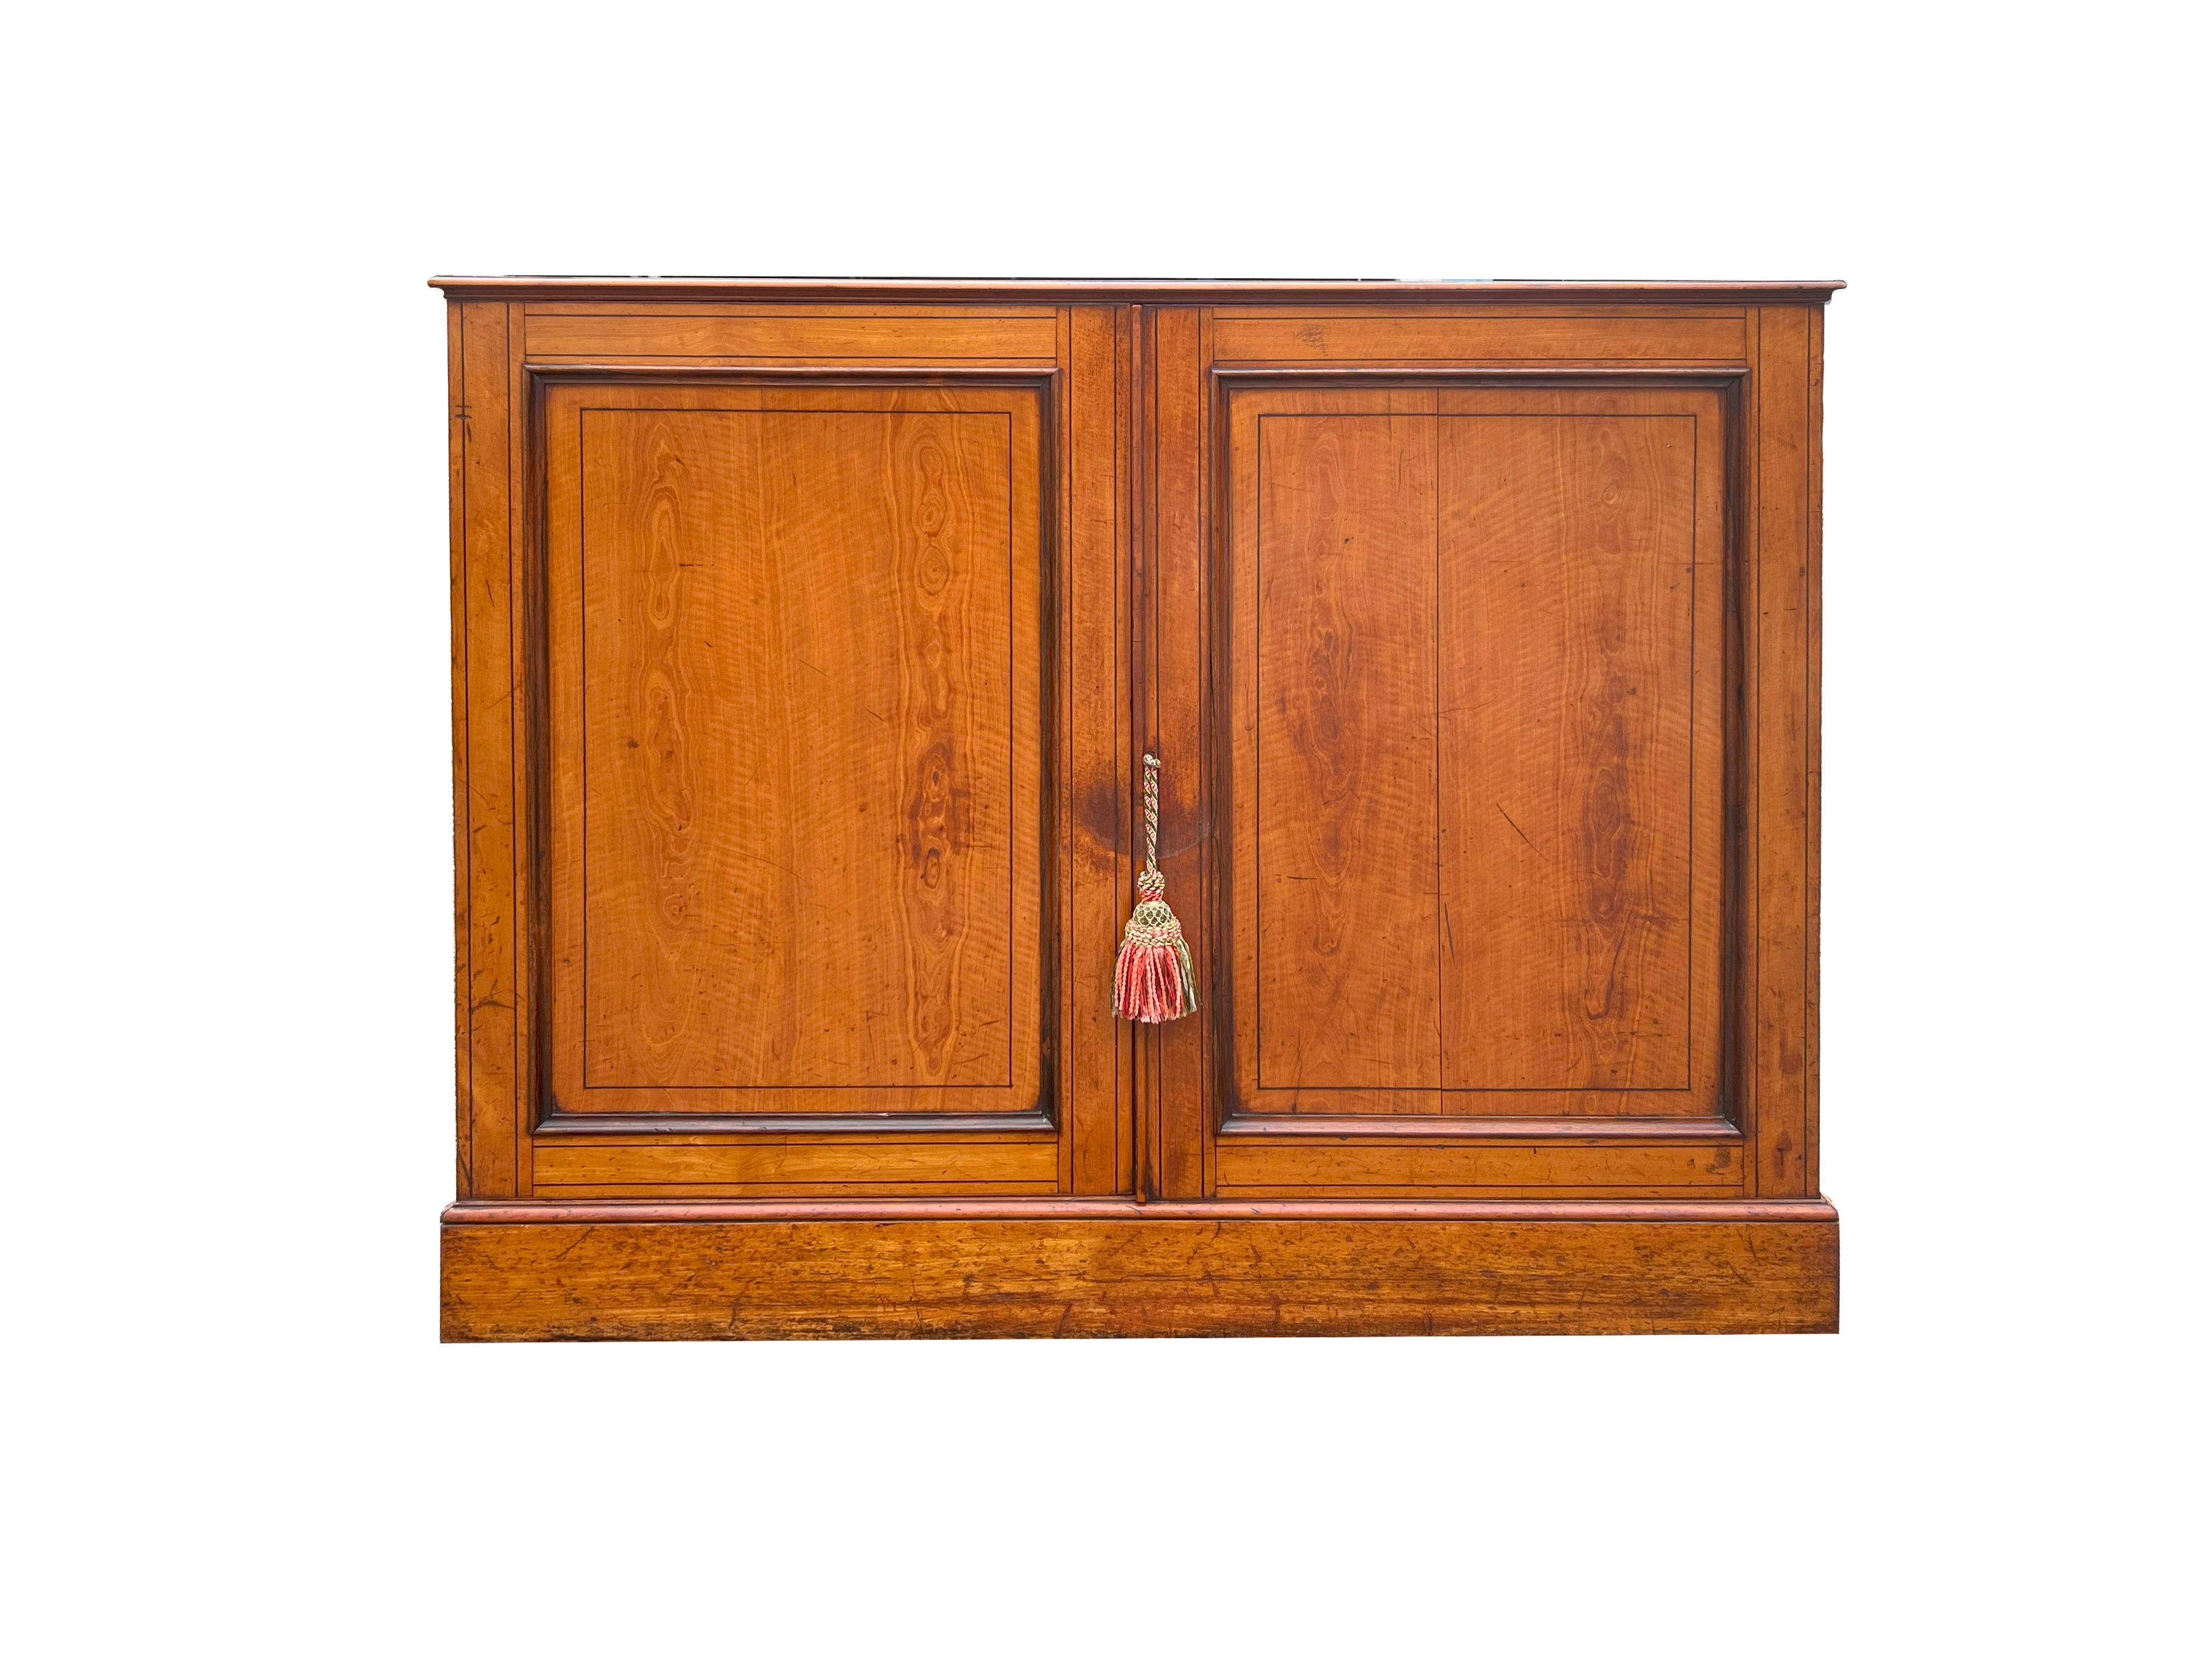 Early 19th Century Regency Satinwood And Mahogany Bookcase For Sale